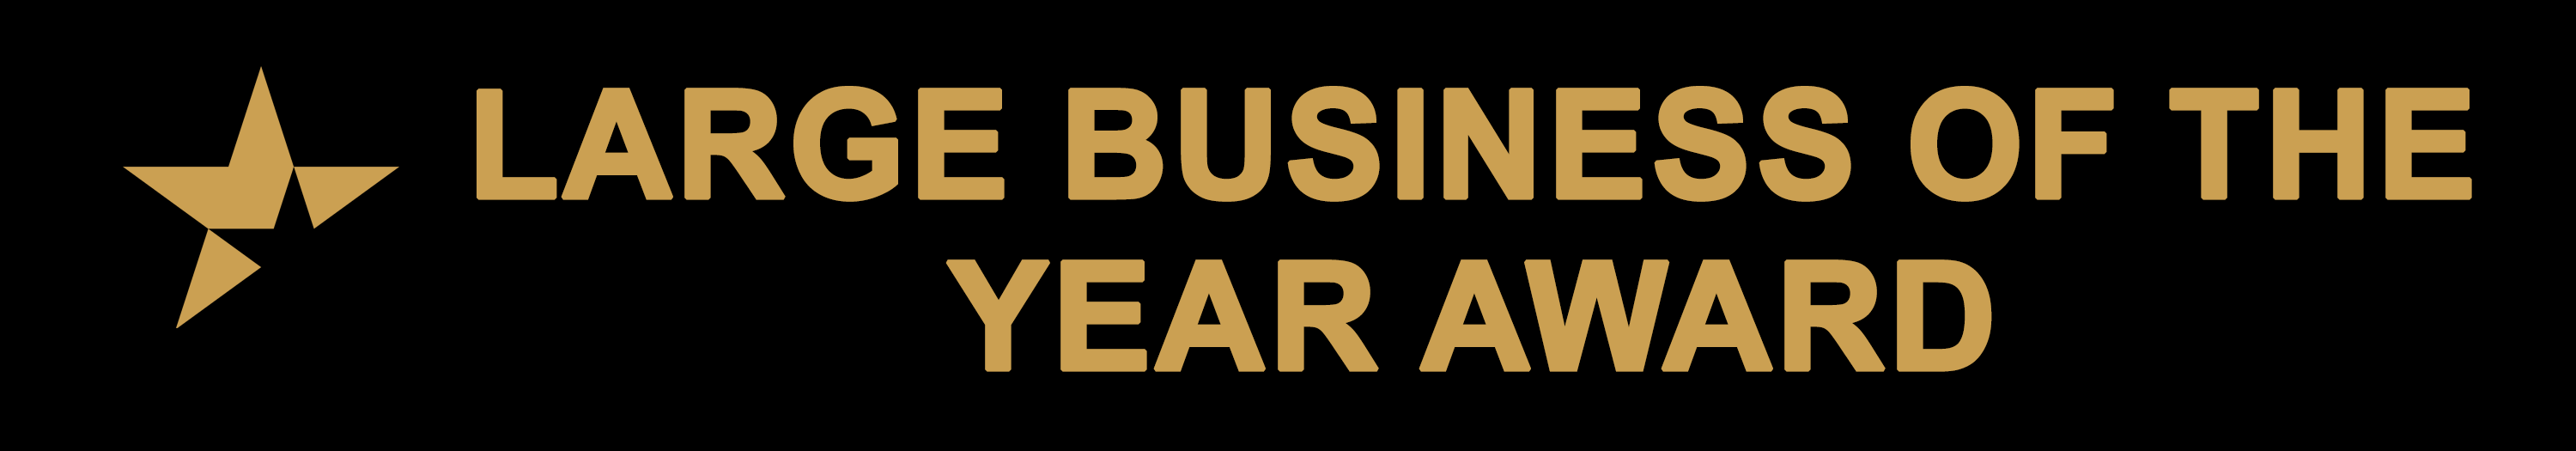 large business of the year award name only